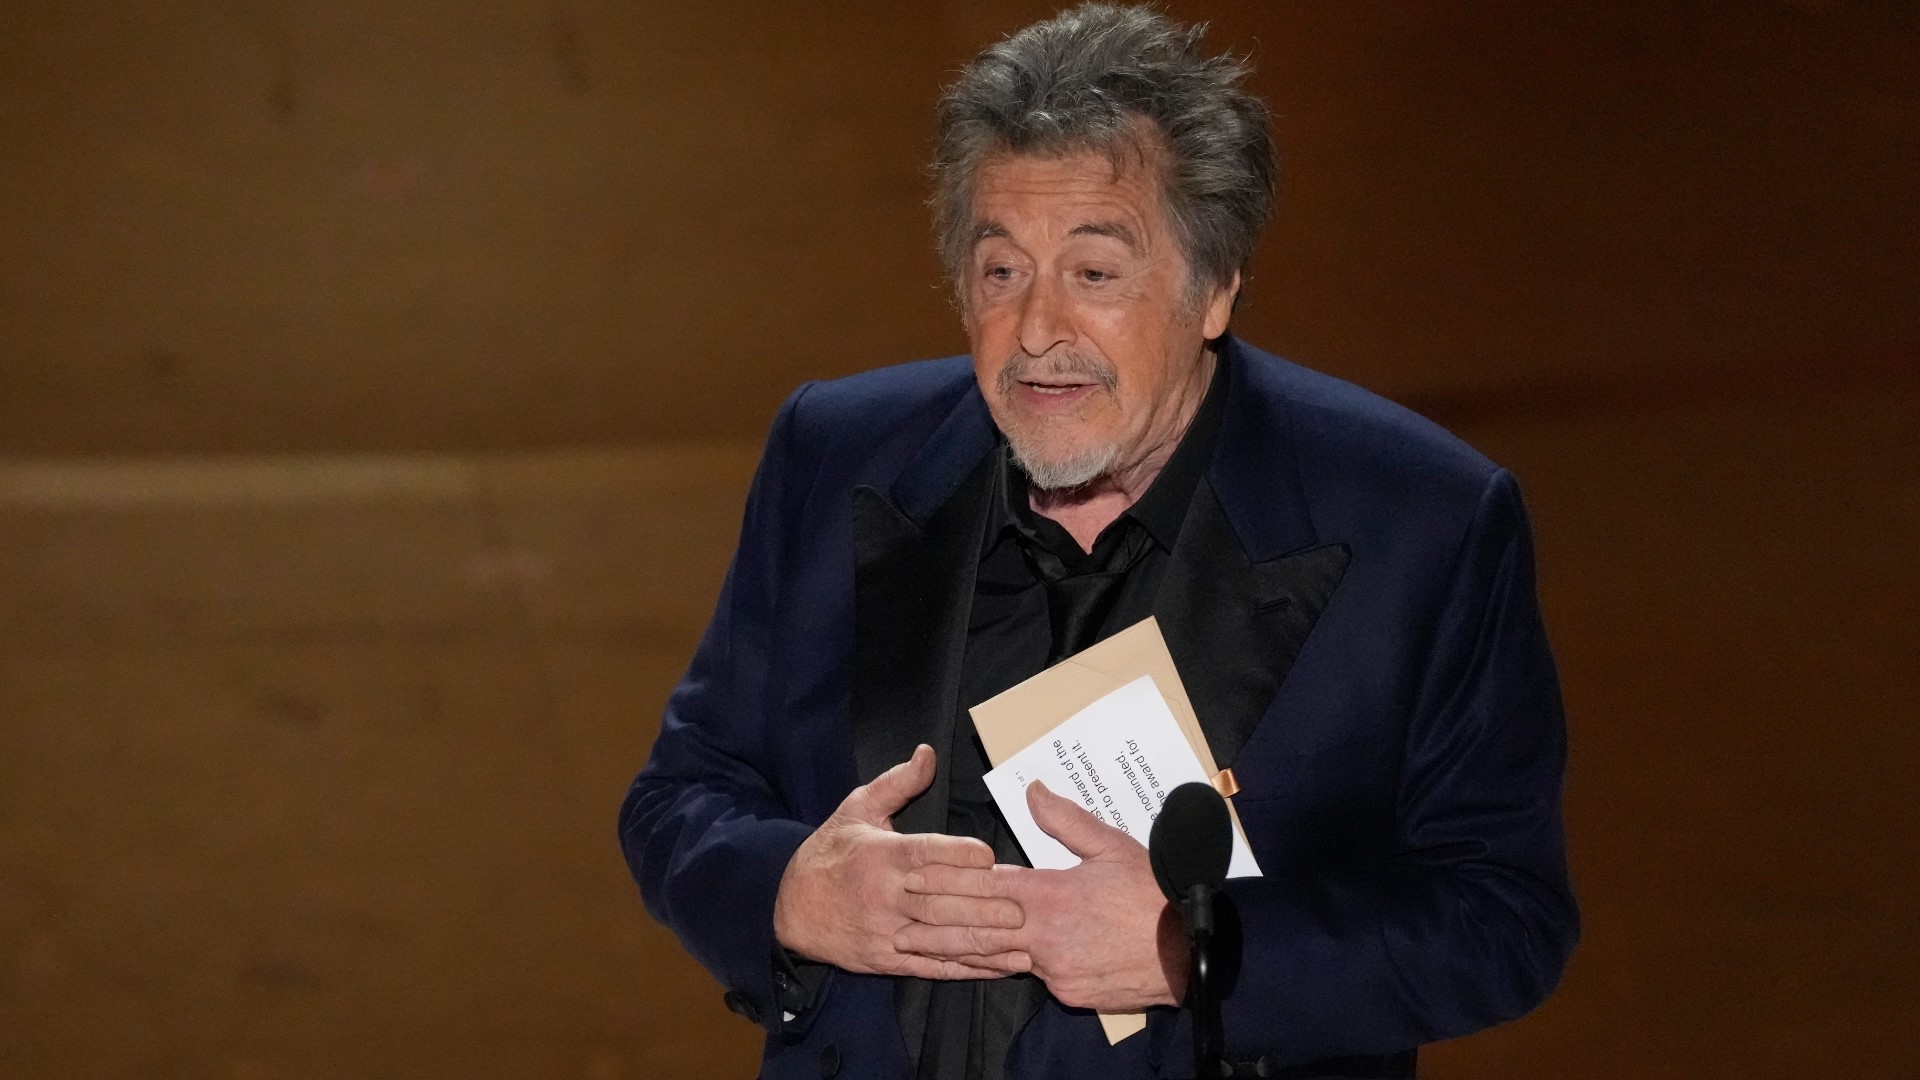 Al Pacino Oscars best picture announcement sparks confusion